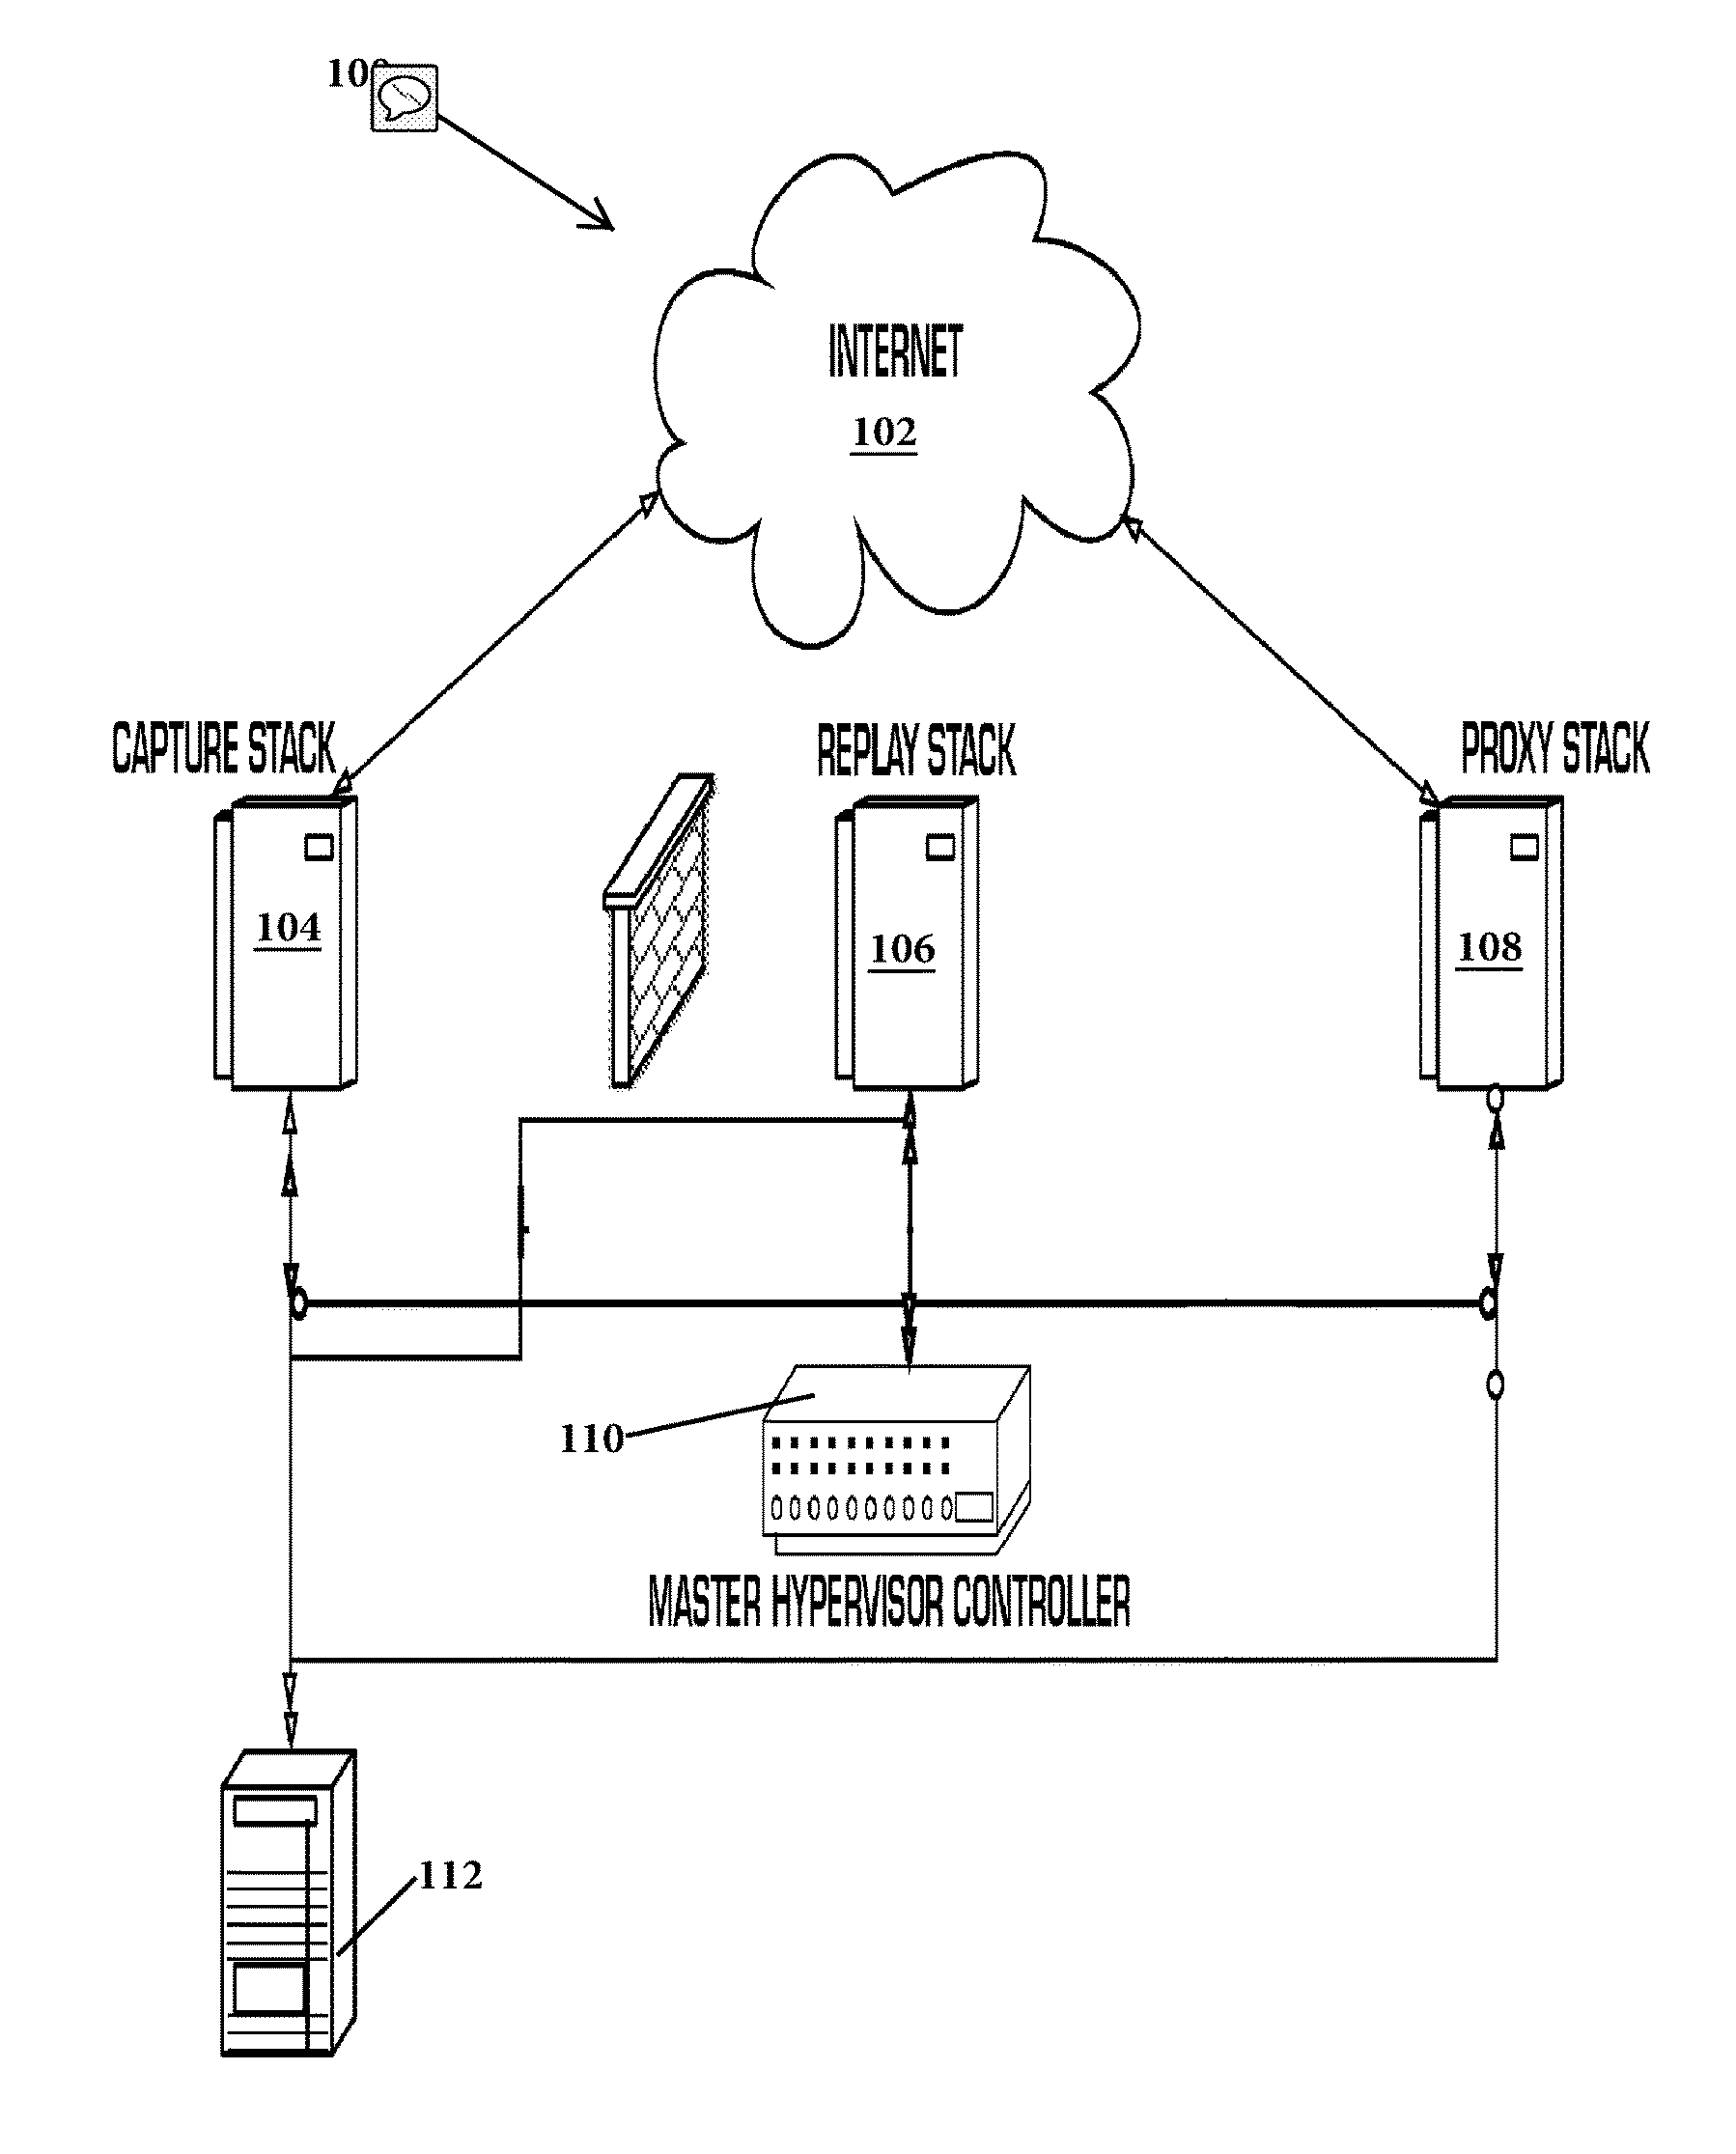 Malware and exploit campaign detection system and method